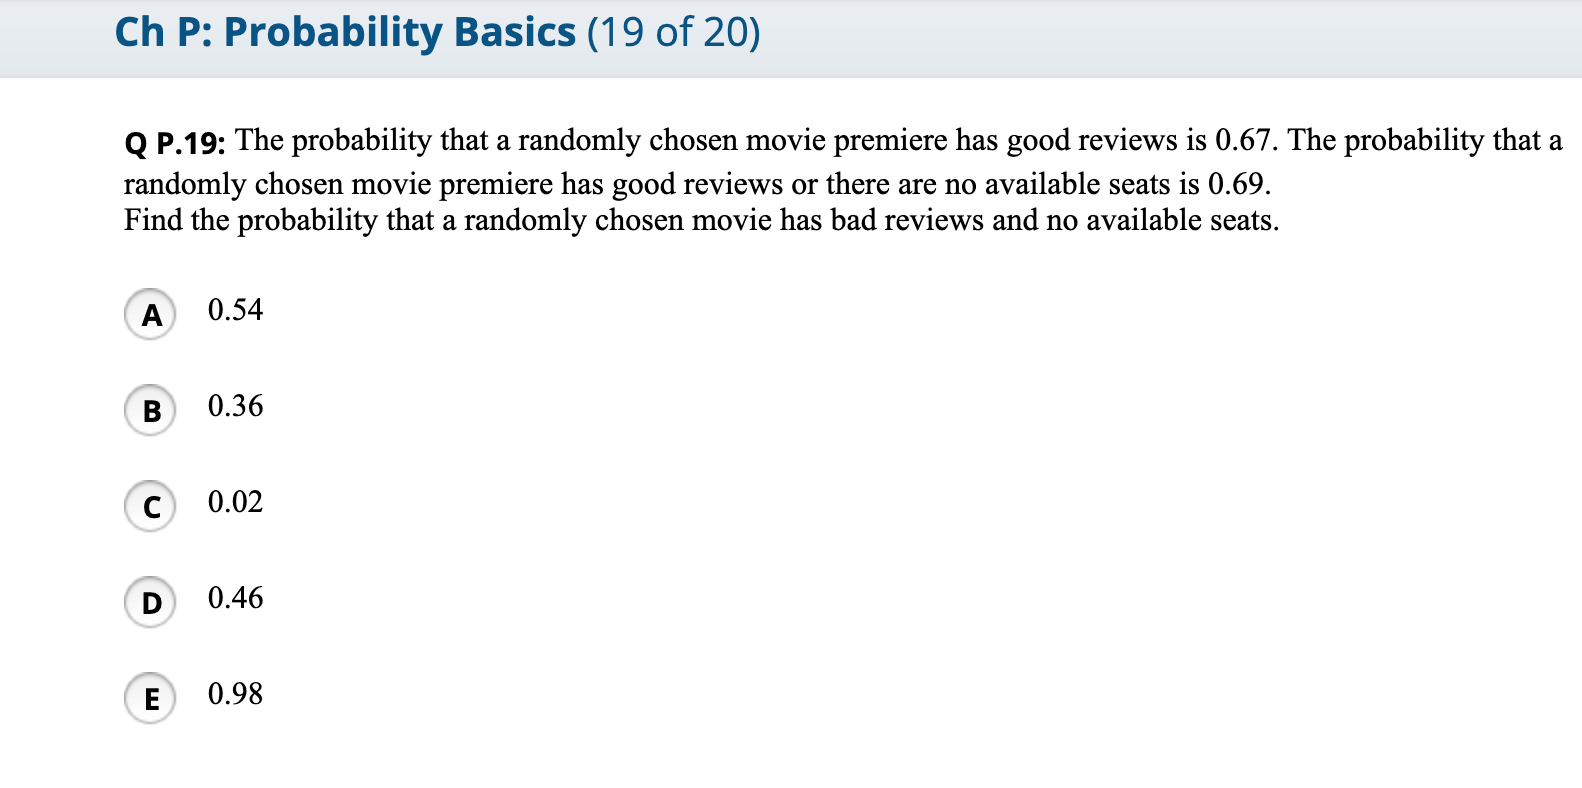 Q P.19: The probability that a randomly chosen movie premiere has good reviews is 0.67. The probability that a
randomly chosen movie premiere has good reviews or there are no available seats is 0.69.
Find the probability that a randomly chosen movie has bad reviews and no available seats.
A
0.54
В
0.36
0.02
D
0.46
E
0.98
